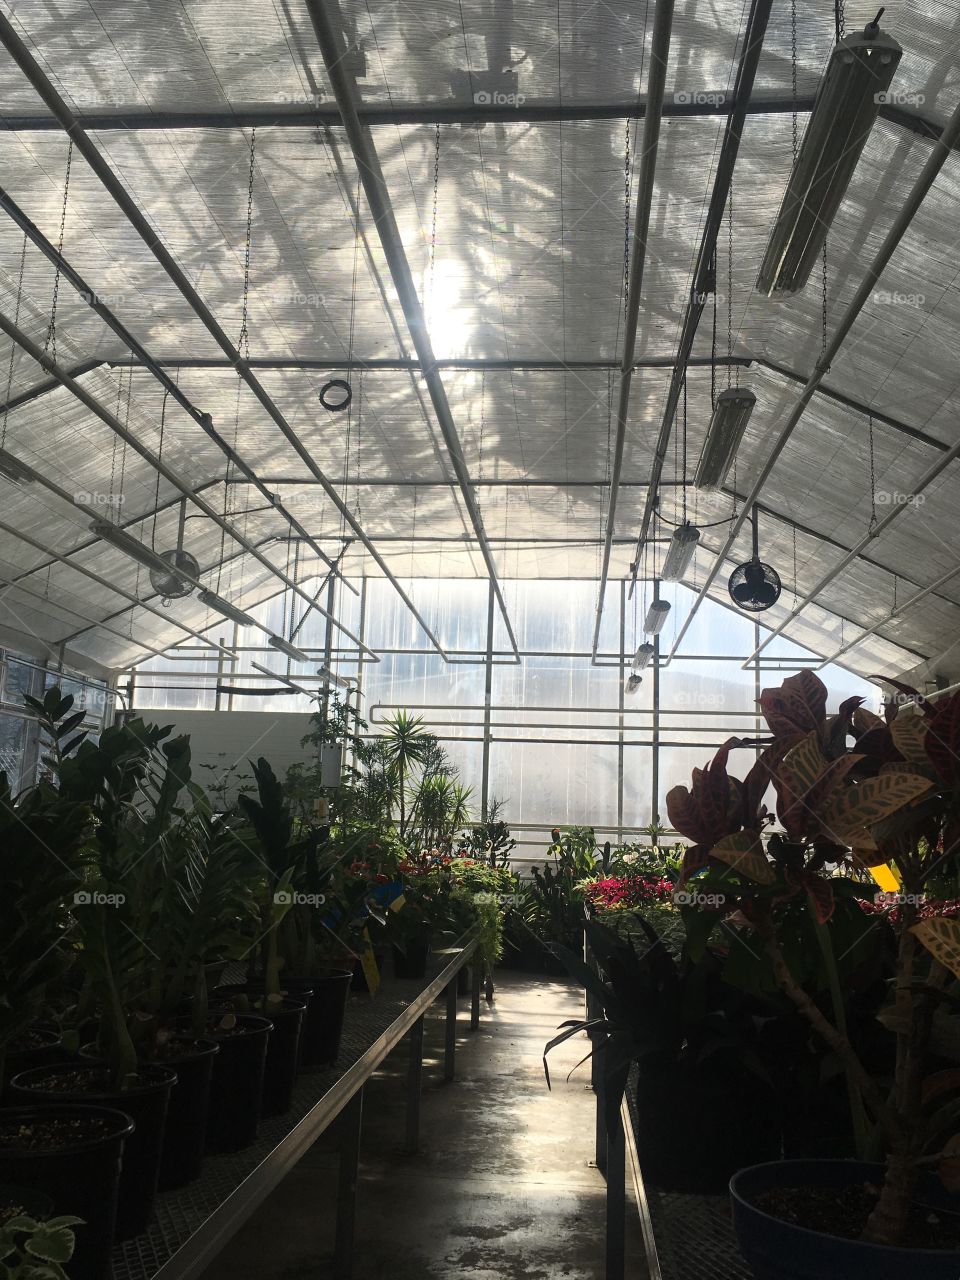 A green house located in Humber College.